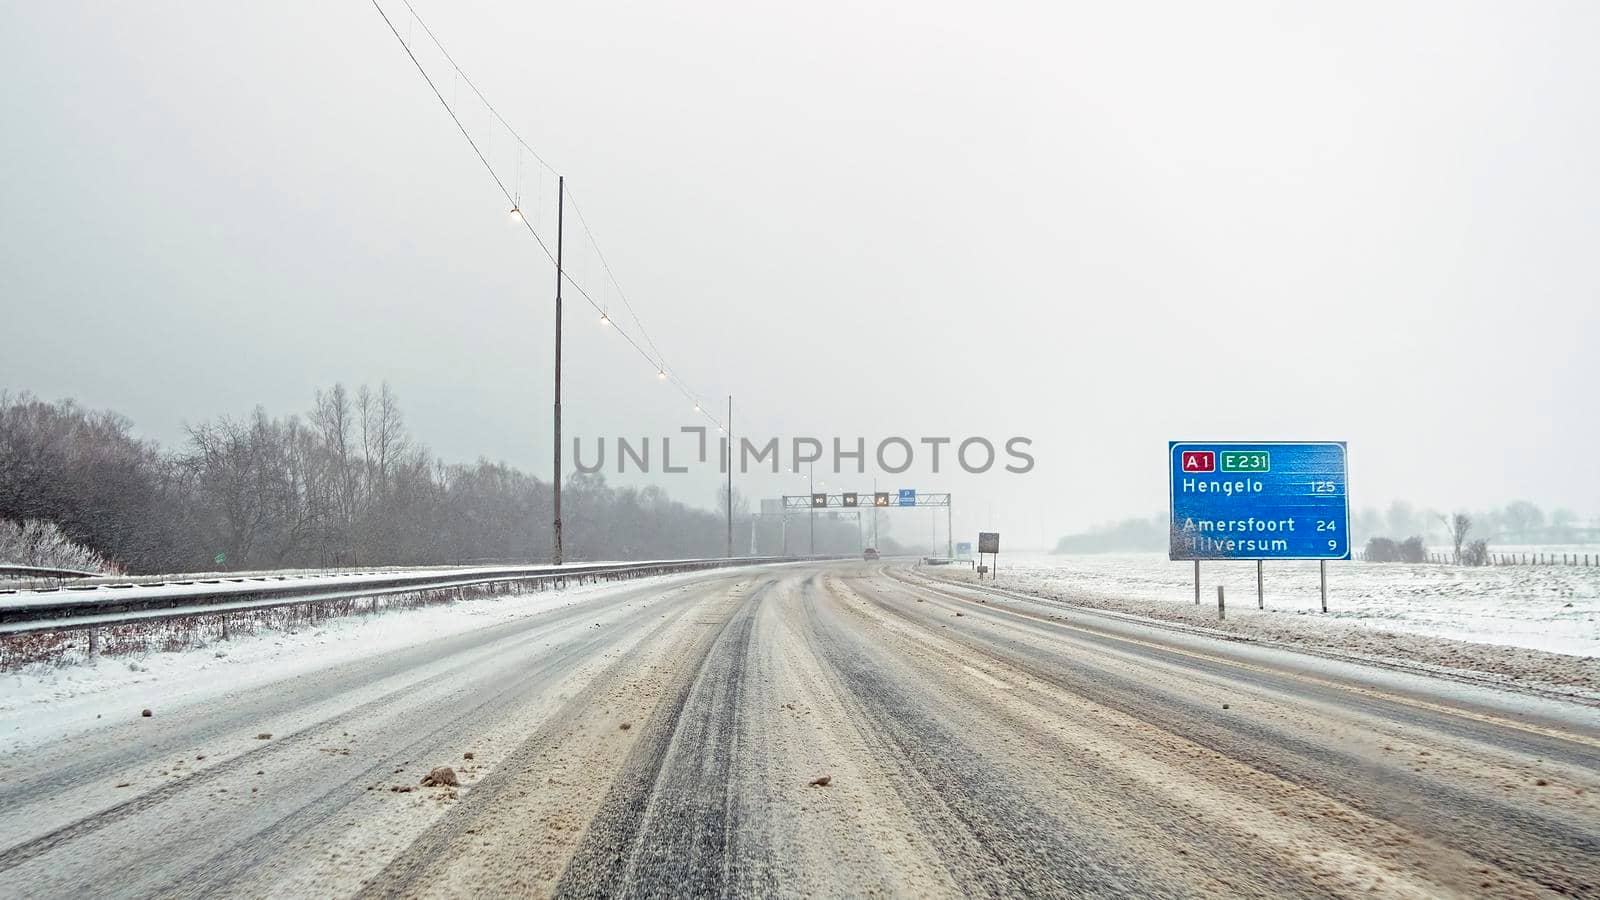 Driving on the highway A1 during a snowstorm in winter in the Netherlands